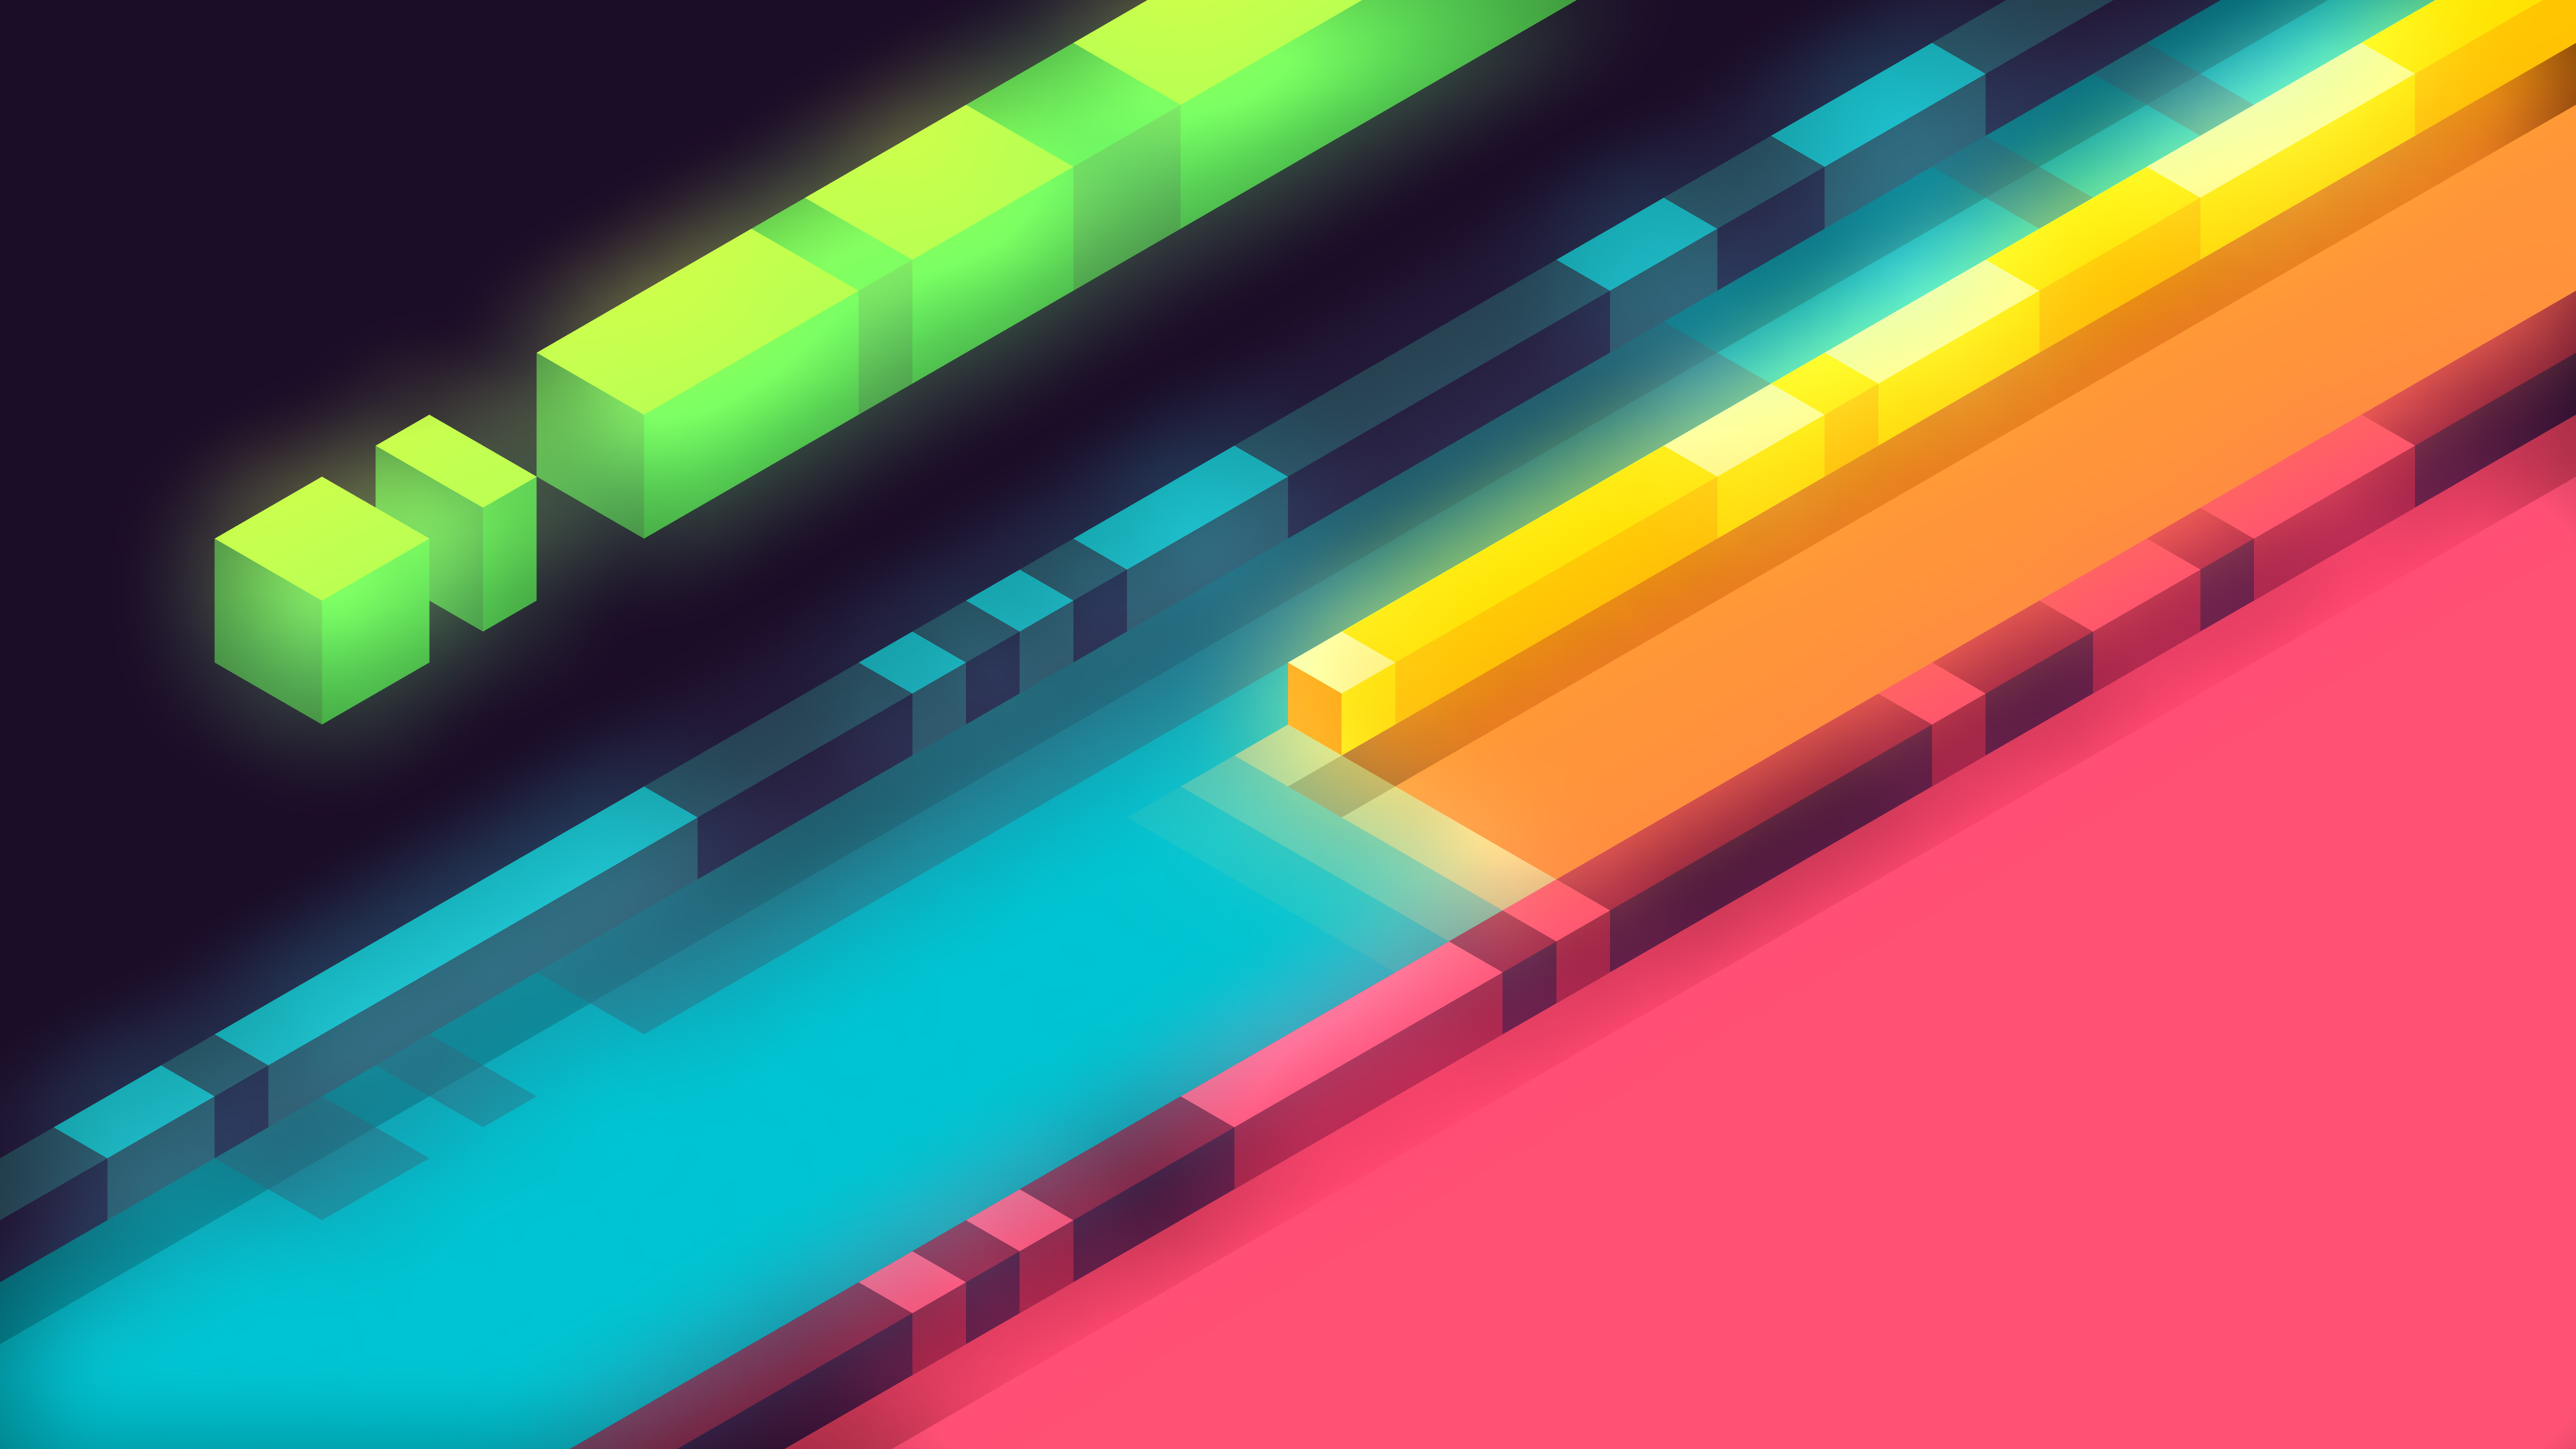 3d Abstract Colorful Shapes Minimalist 5k, HD 3D, 4k ...